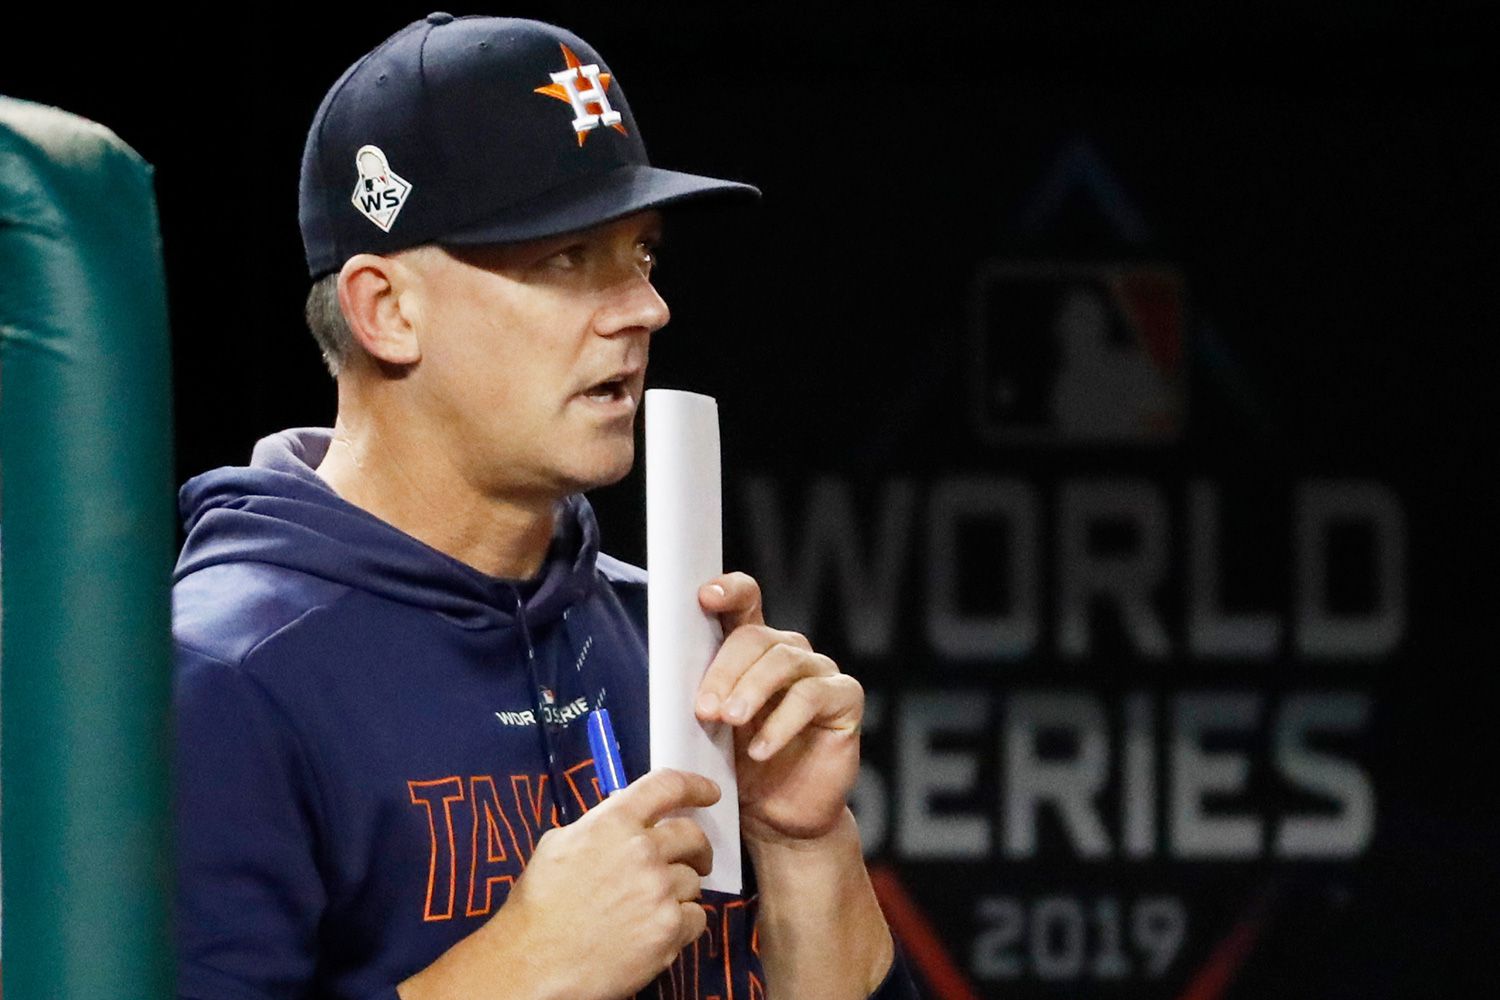 Houston Astros manager AJ Hinch watches during the seventh inning of Game 4 of the baseball World Series against the Washington Nationals, in Washington World Series Astros Nationals Baseball, Washington, USA - 26 Oct 2019